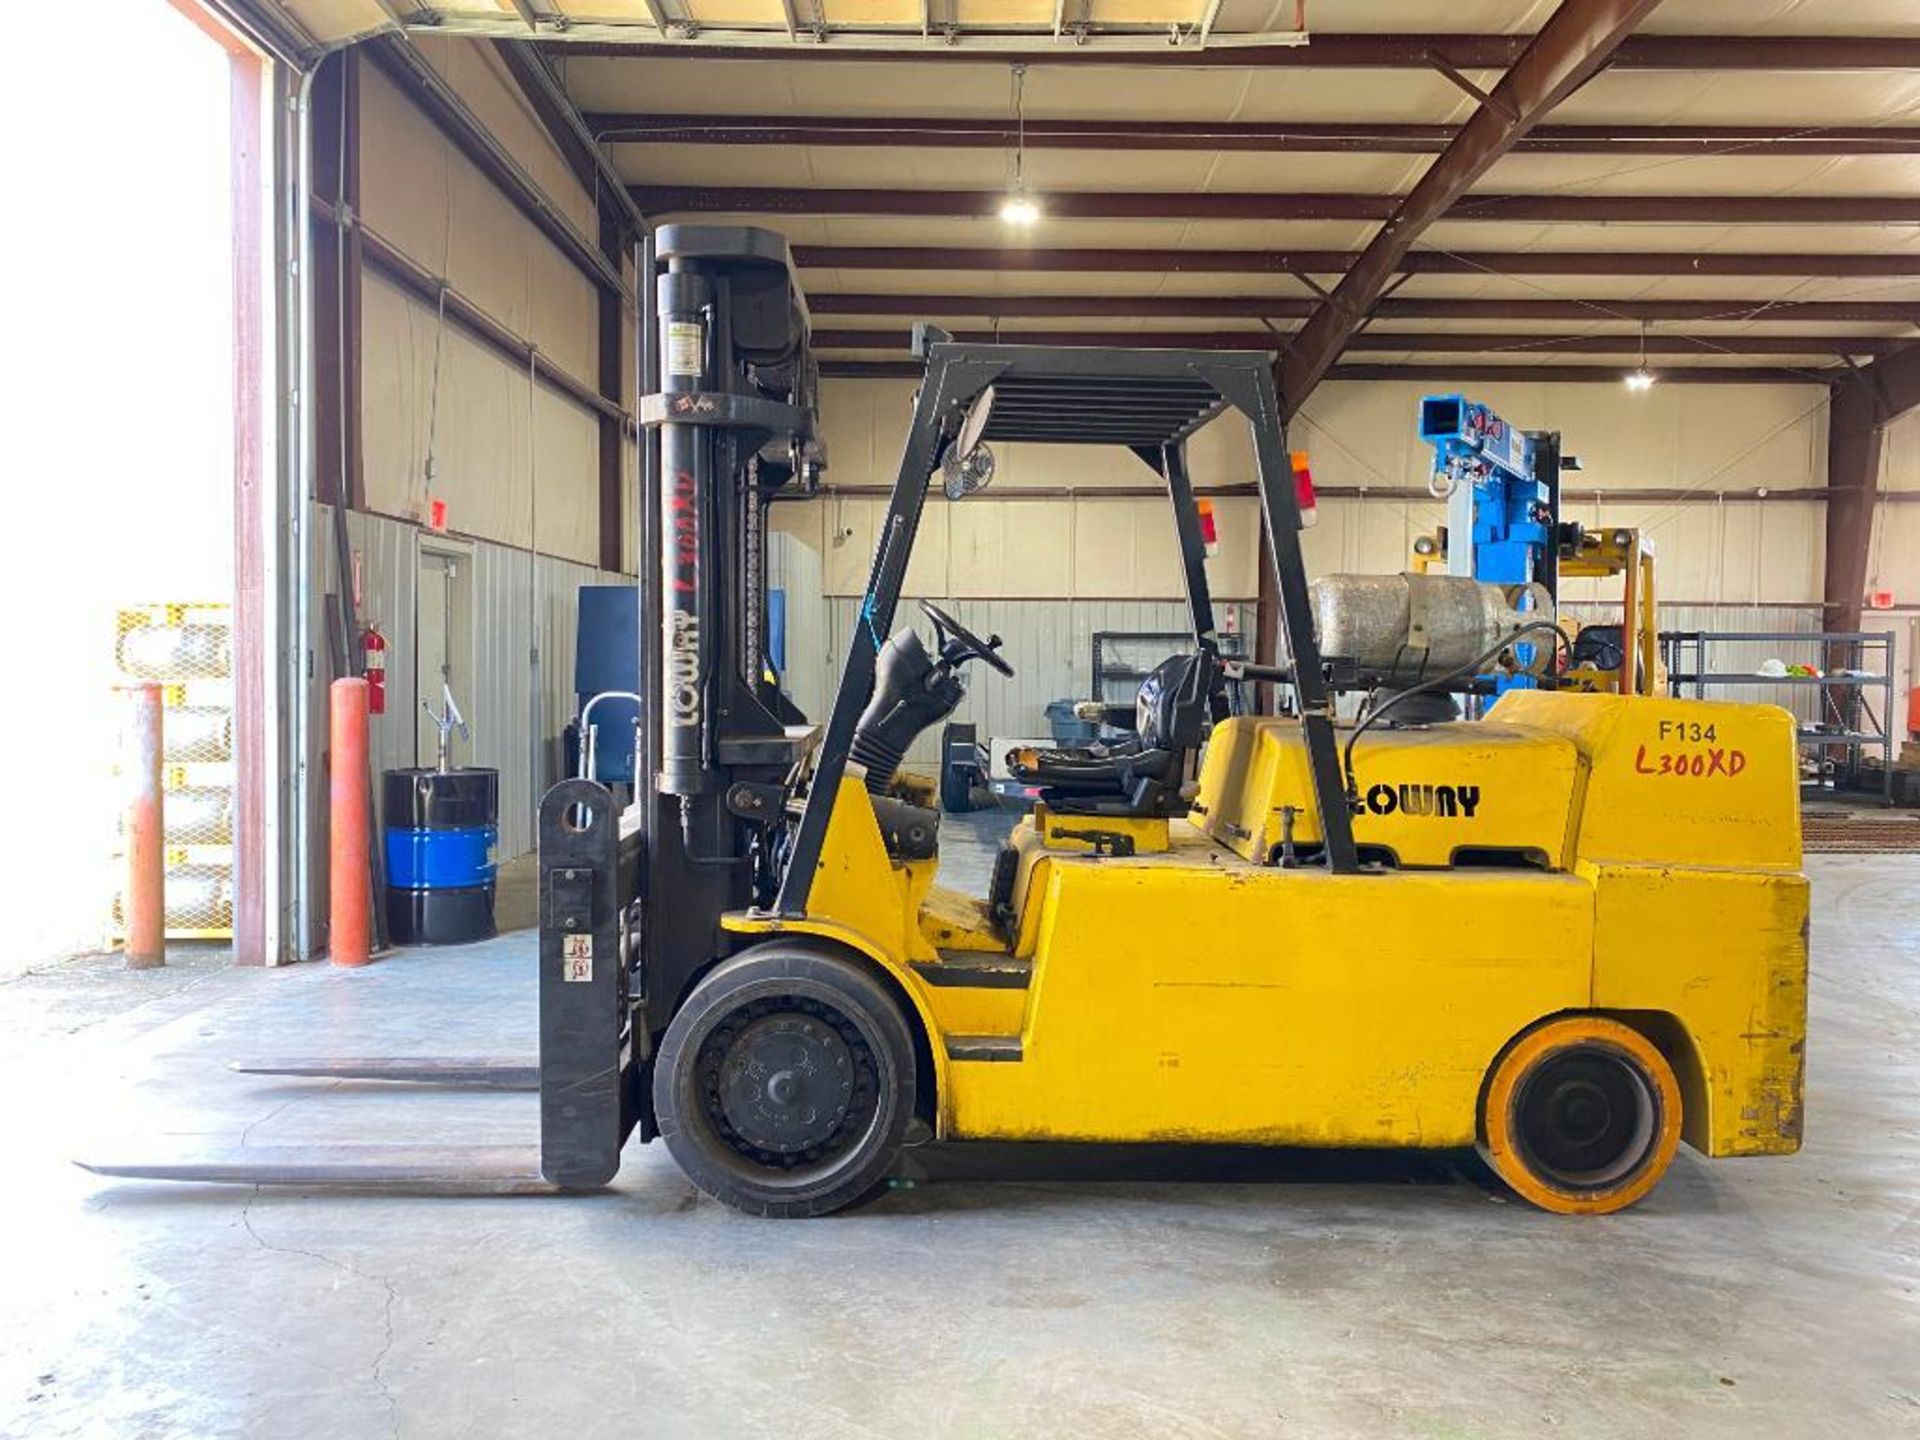 2008 Lowry 30,000-LB. Forklift, Model L300XDS, S/N L3007910508, LPG, Cushion Tires, 2-Stage Mast, 90 - Image 2 of 6